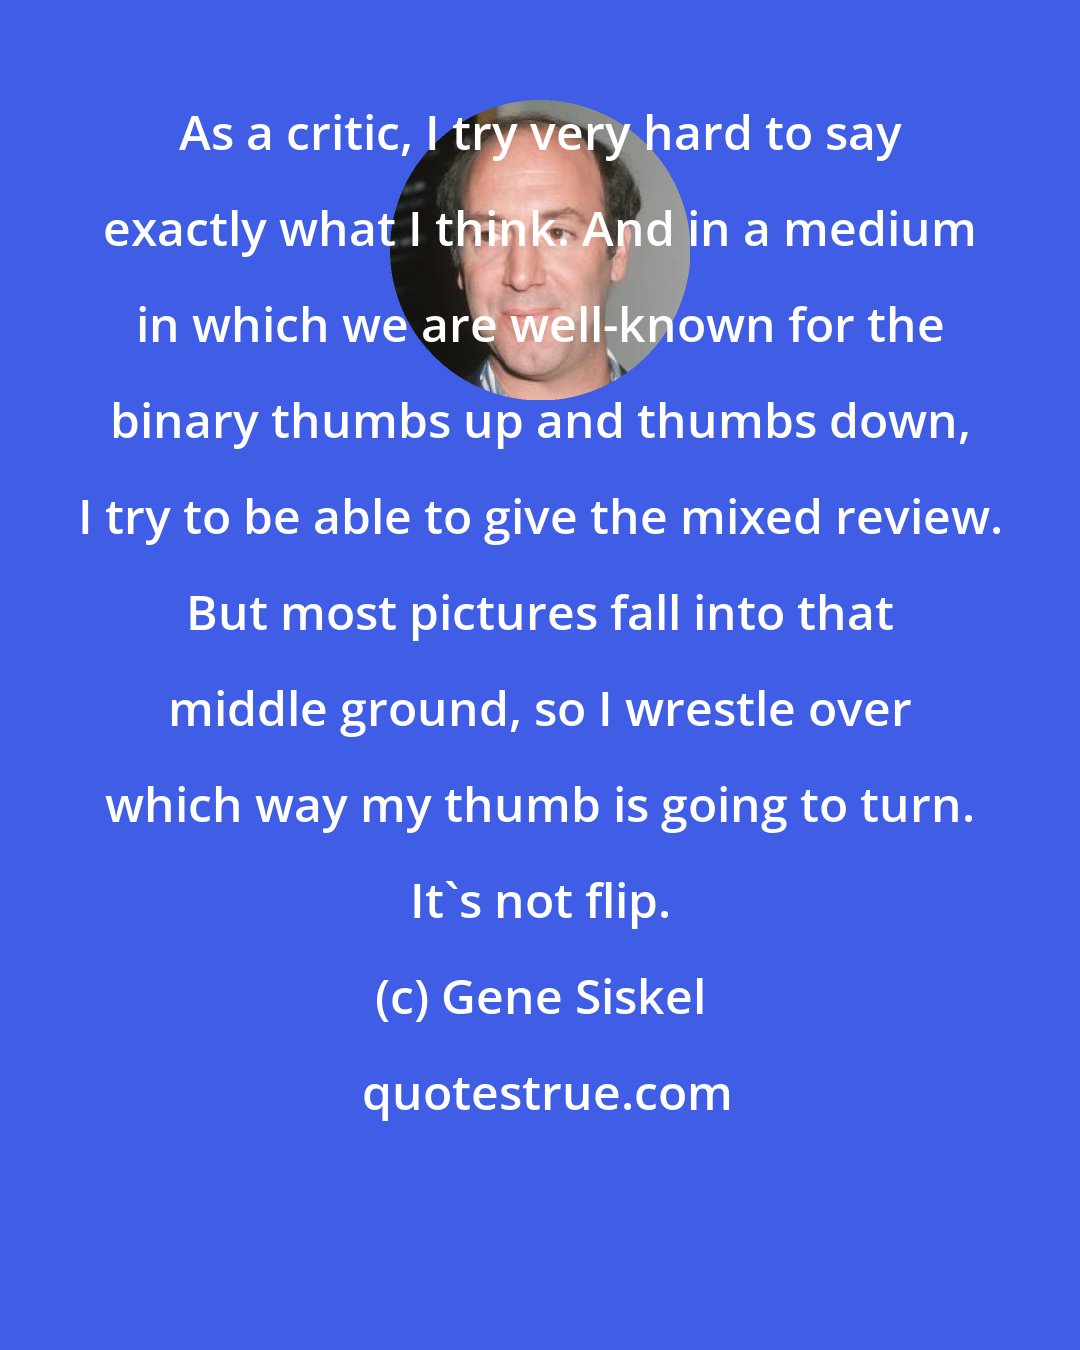 Gene Siskel: As a critic, I try very hard to say exactly what I think. And in a medium in which we are well-known for the binary thumbs up and thumbs down, I try to be able to give the mixed review. But most pictures fall into that middle ground, so I wrestle over which way my thumb is going to turn. It's not flip.